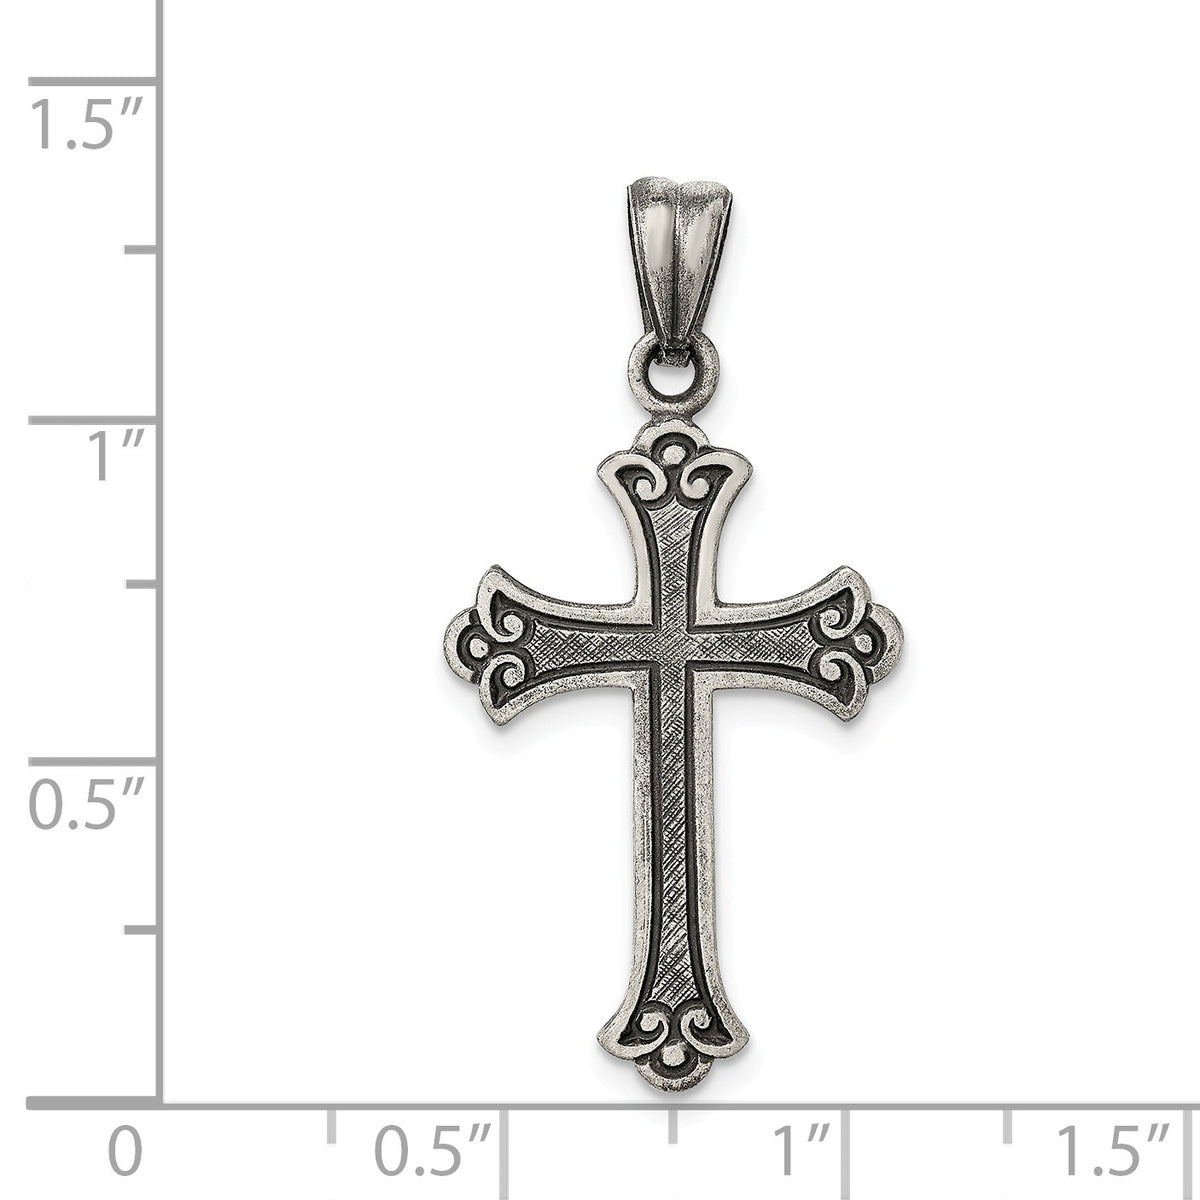 Alternate view of the Sterling Silver Antiqued Fleur de Lis Cross Pendant by The Black Bow Jewelry Co.